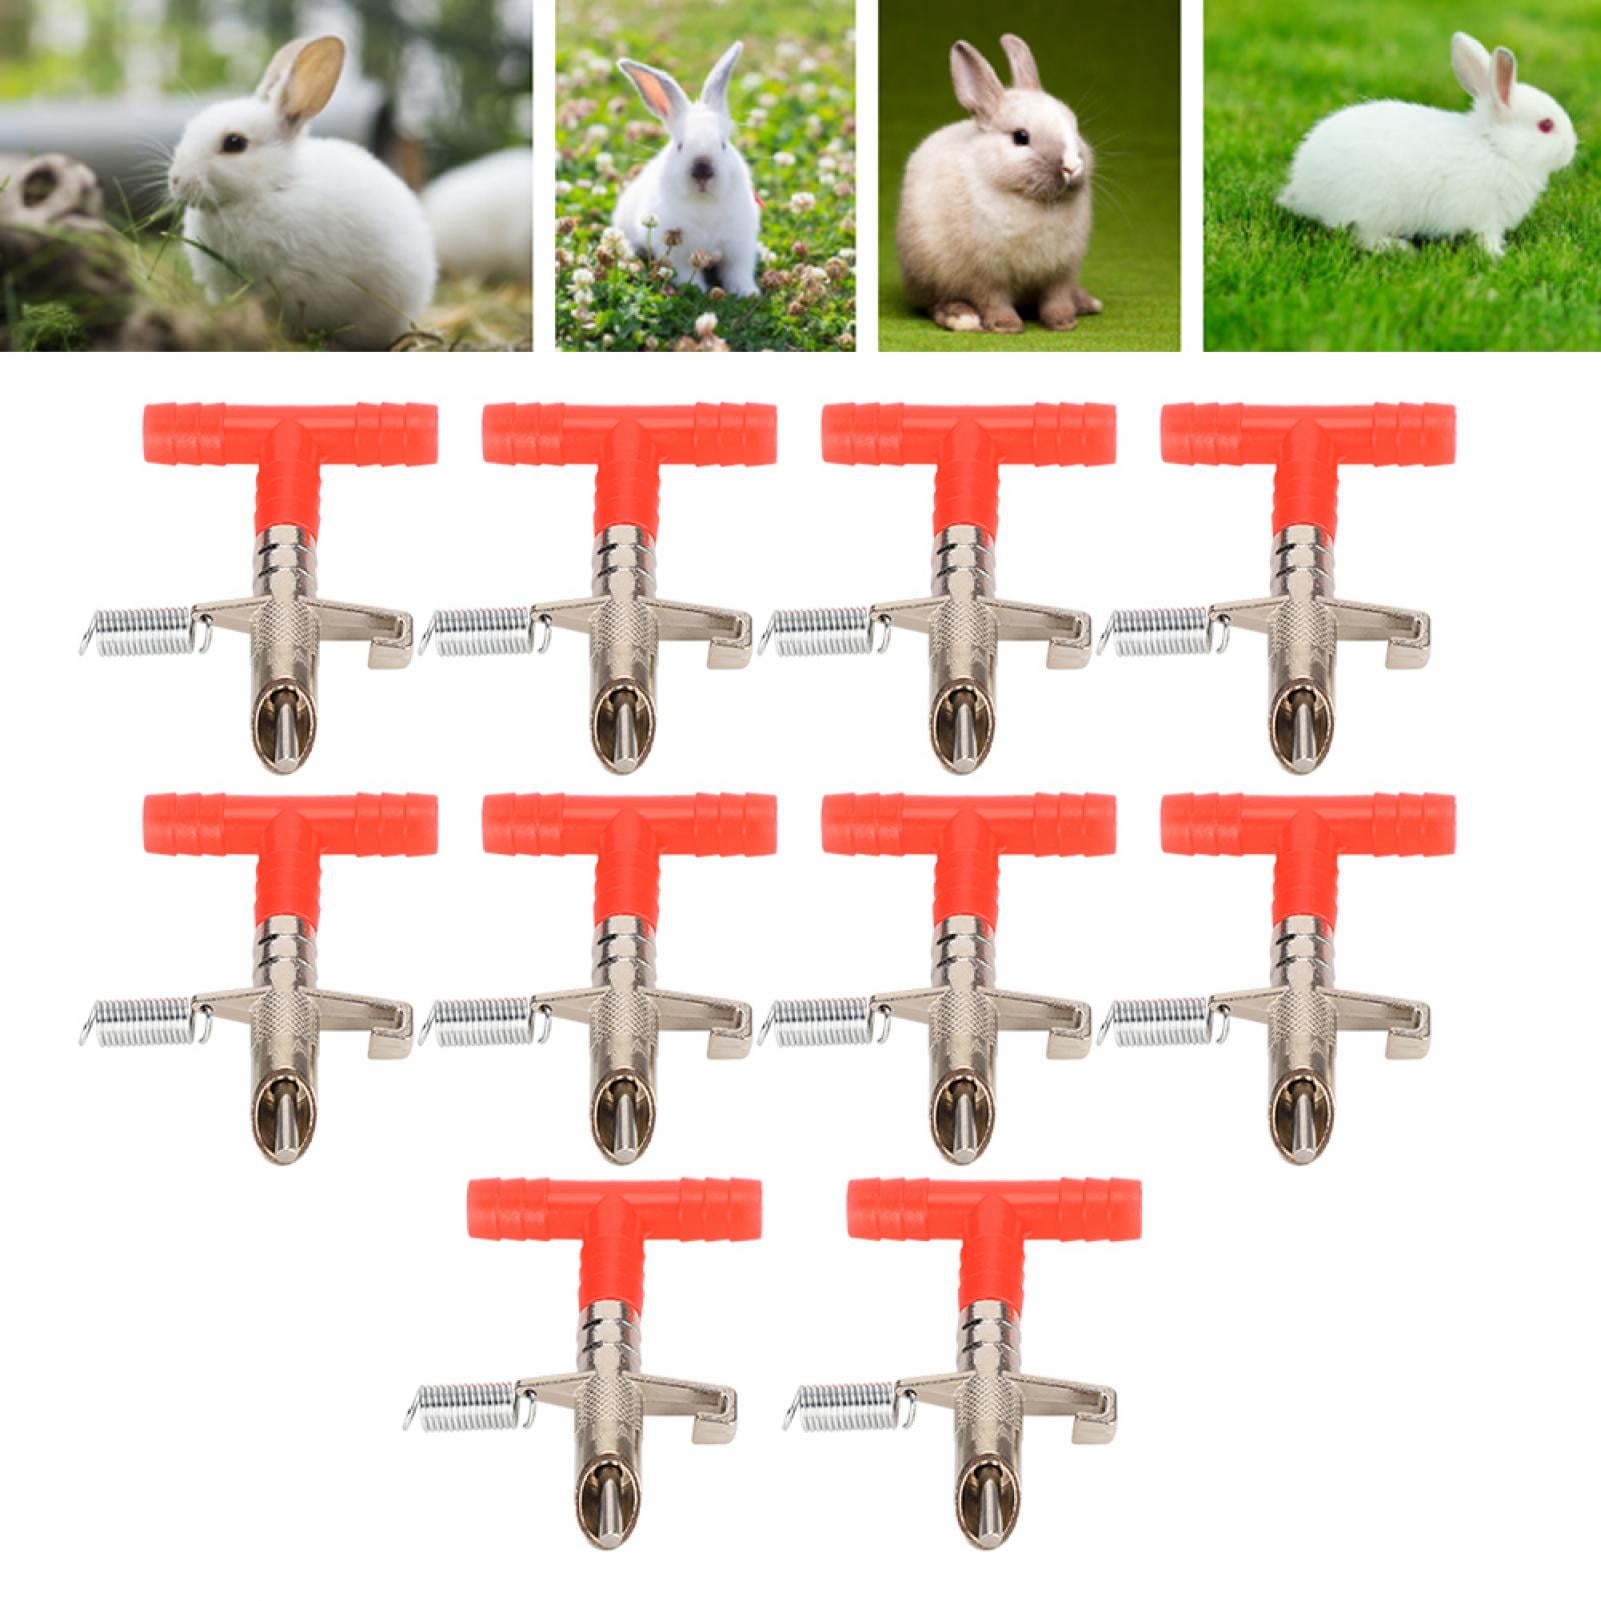 Nipple Drinkers 100Pcs Rabbit Water Red Pet Feeder\t nt Ferret Mouse White 